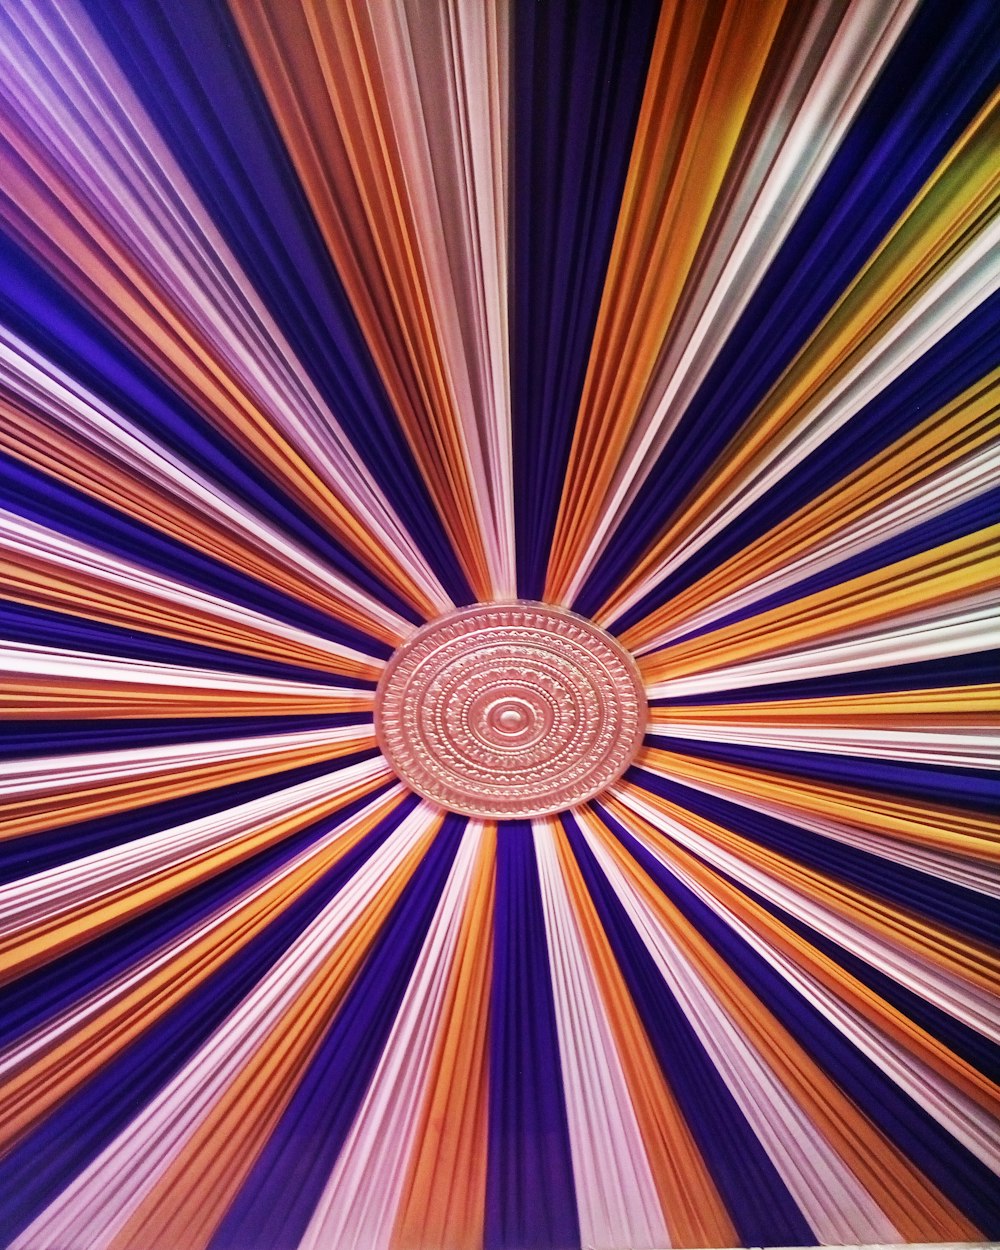 a colorful background with a circular design in the center